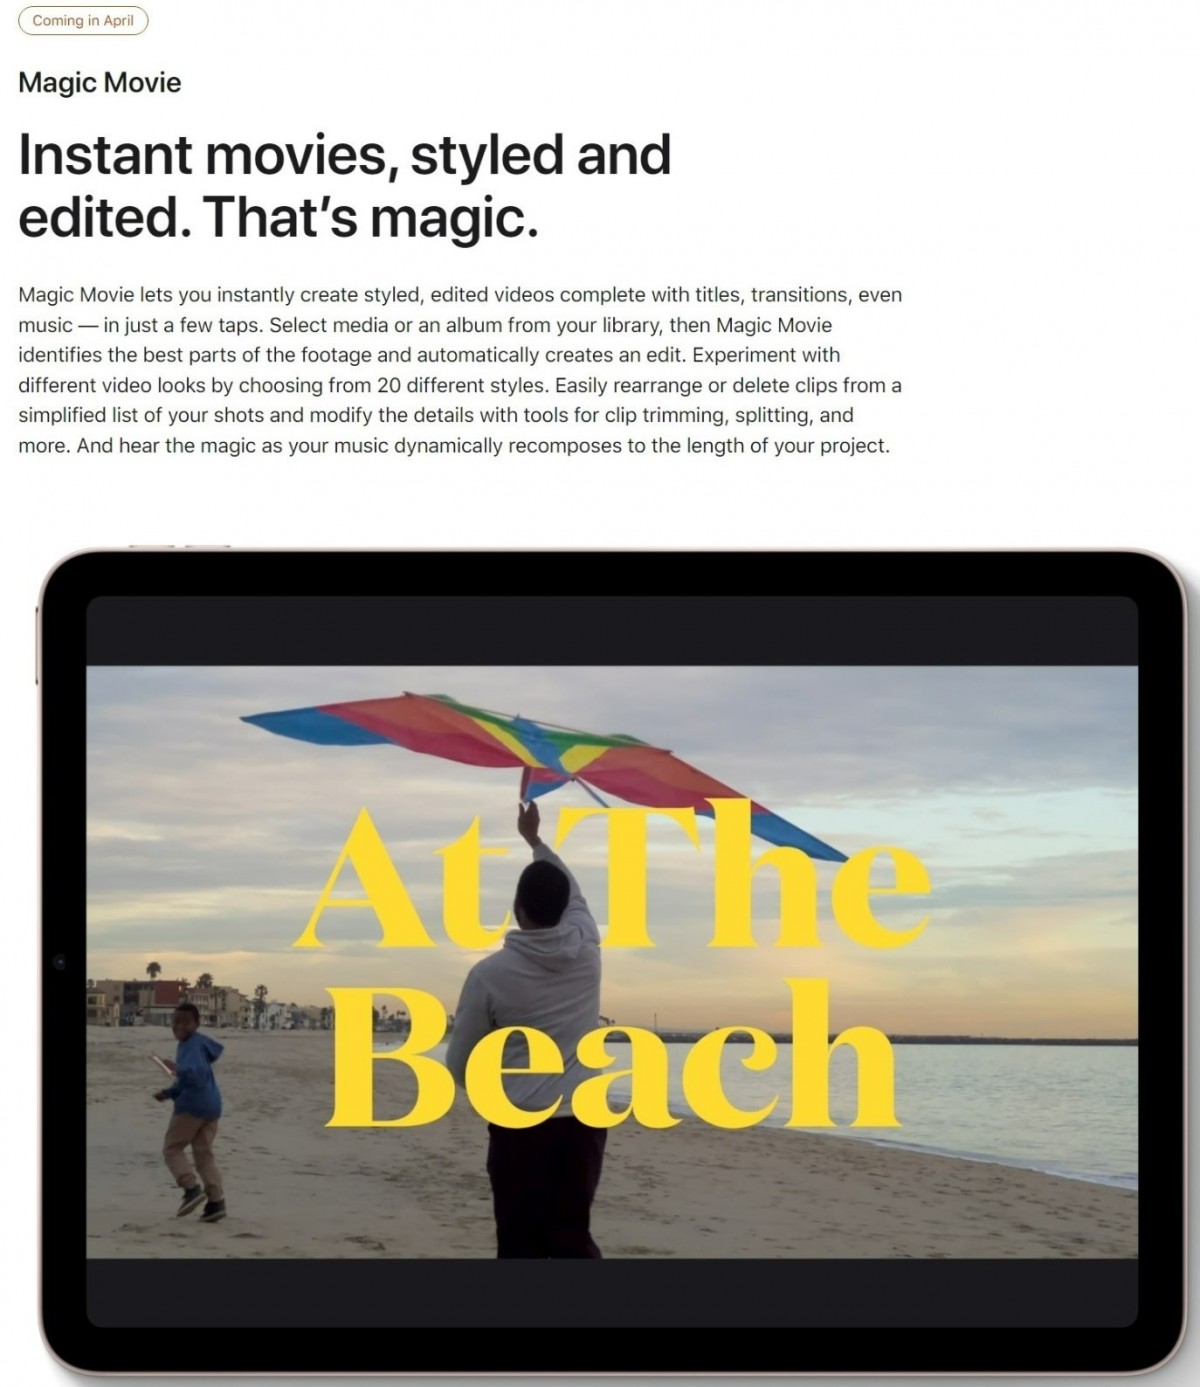 Apple teases new features for iMovie, coming in April